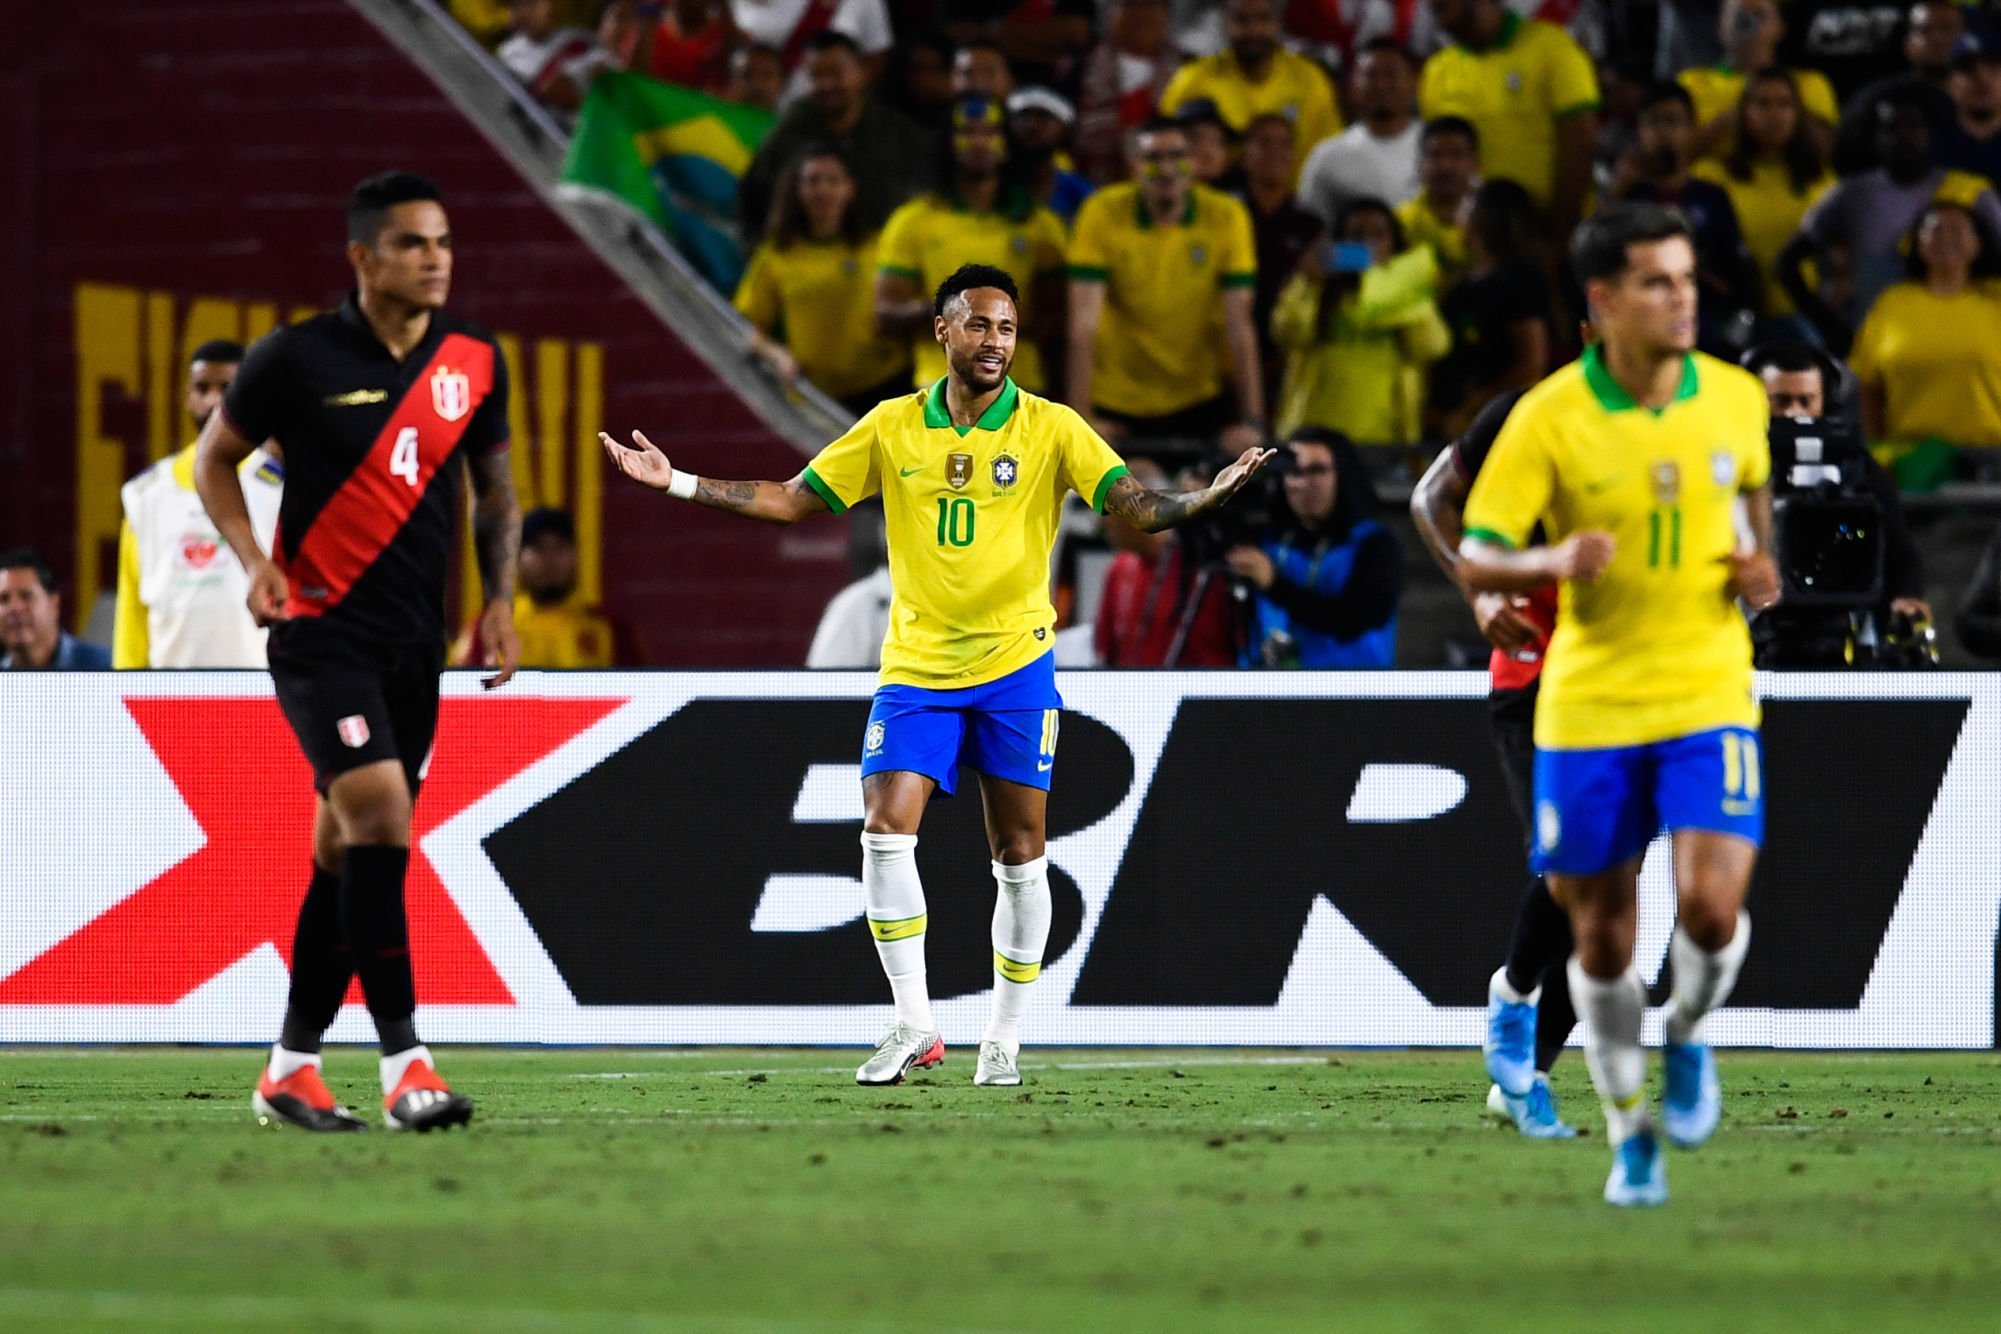 Sep 10, 2019; Los Angeles, CA, USA; Brazil forward Neymar (10) reacts during the the second half of the South American Showdown soccer match against Peru at Los Angeles Coliseum. Photo : SUSA / Icon Sport